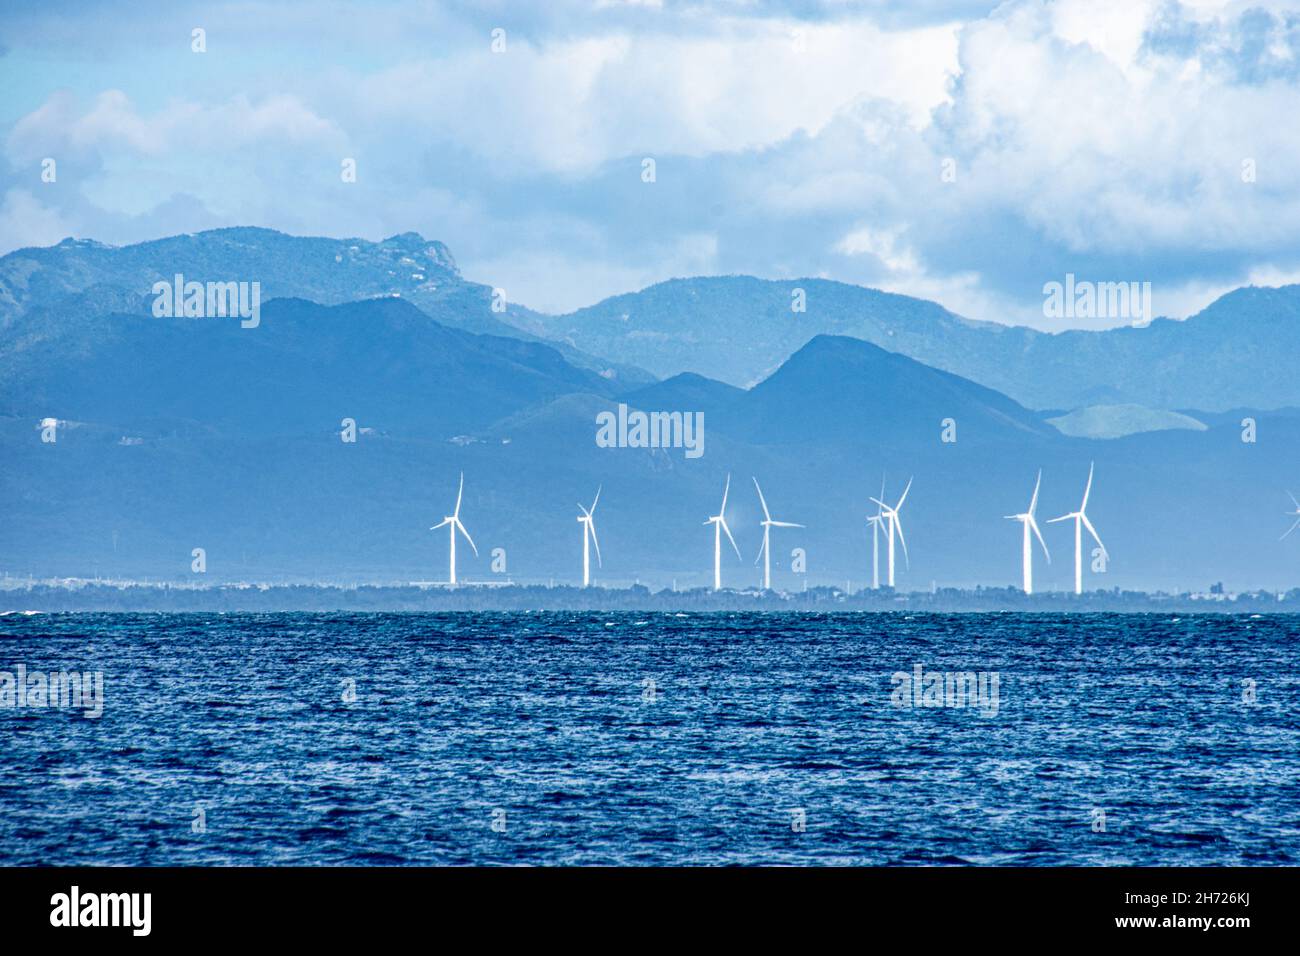 Dramatic view of white wind turbines on a background of blue mountains seen from the blue wave water of the Caribbean Sea.   Puerto Rico, USA Stock Photo